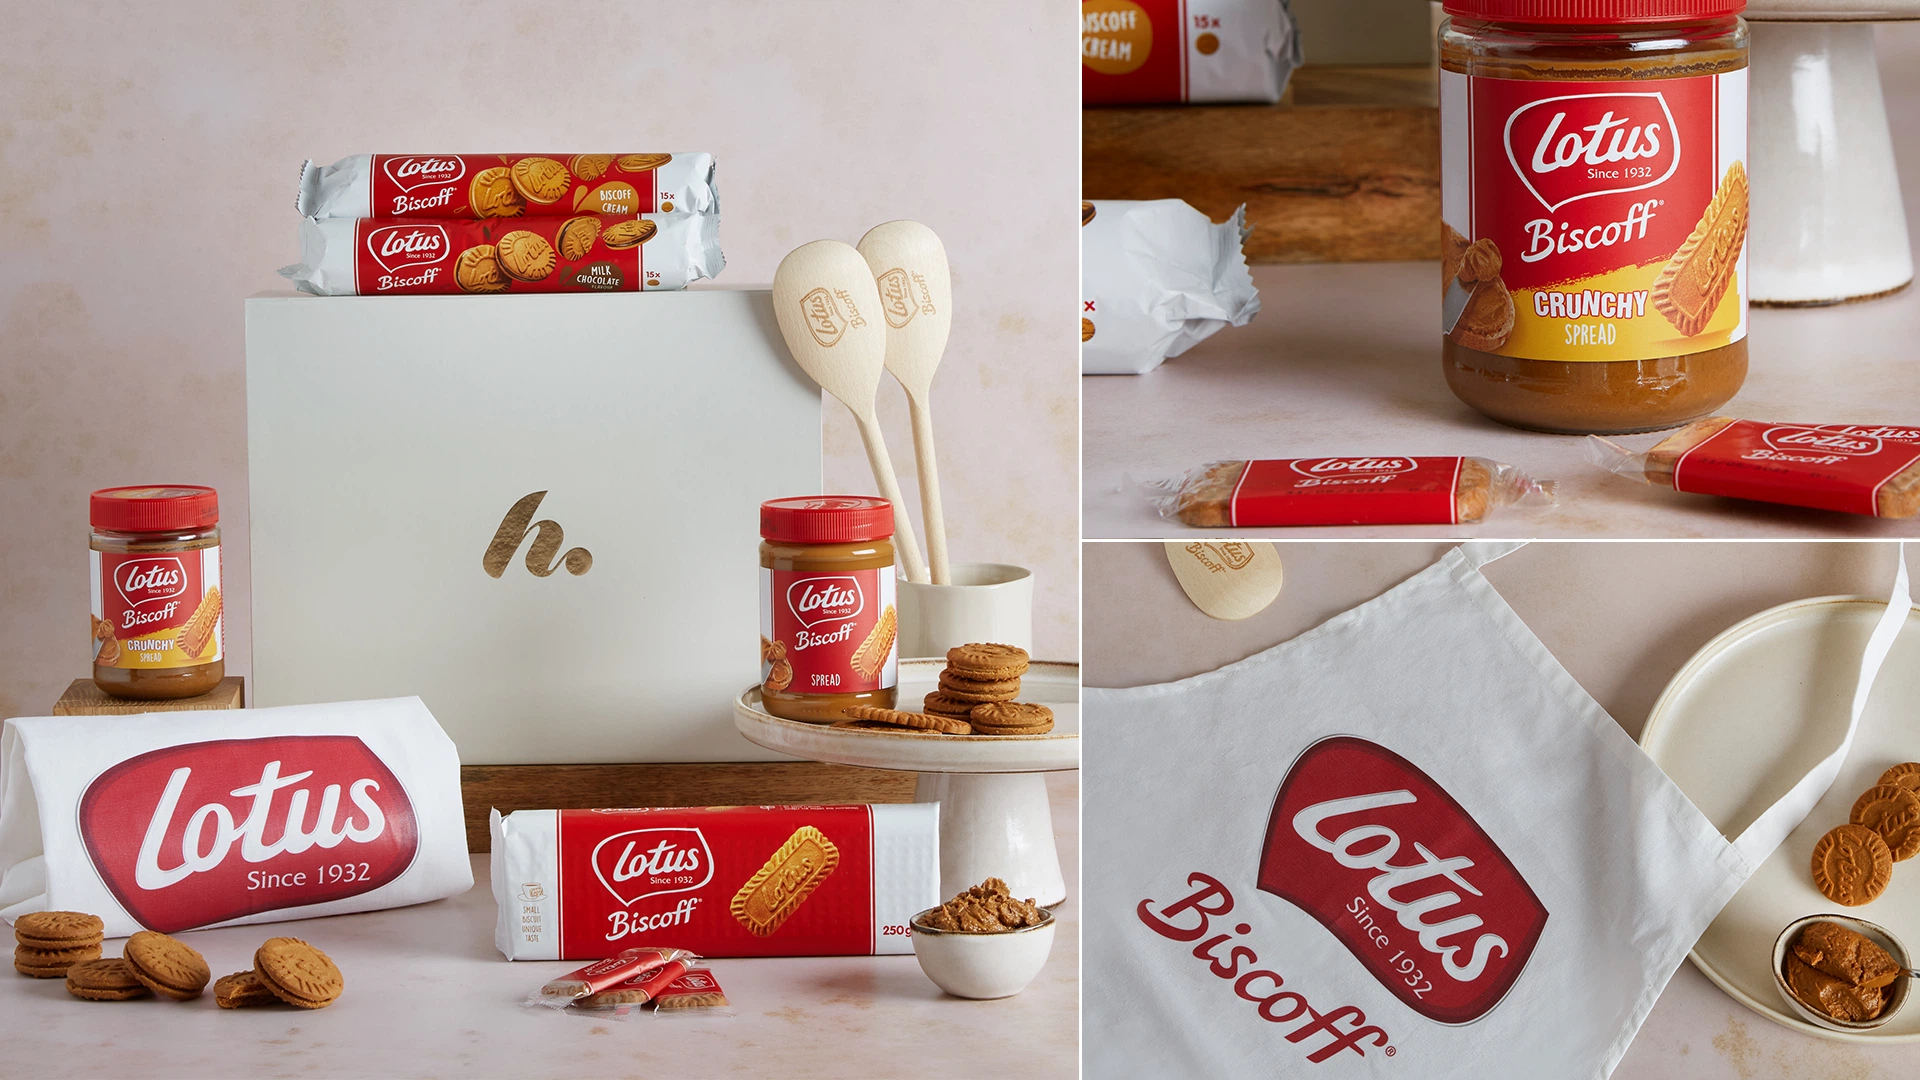 Discover the Lotus Biscoff Baking Gift Hamper available only at hampers.com